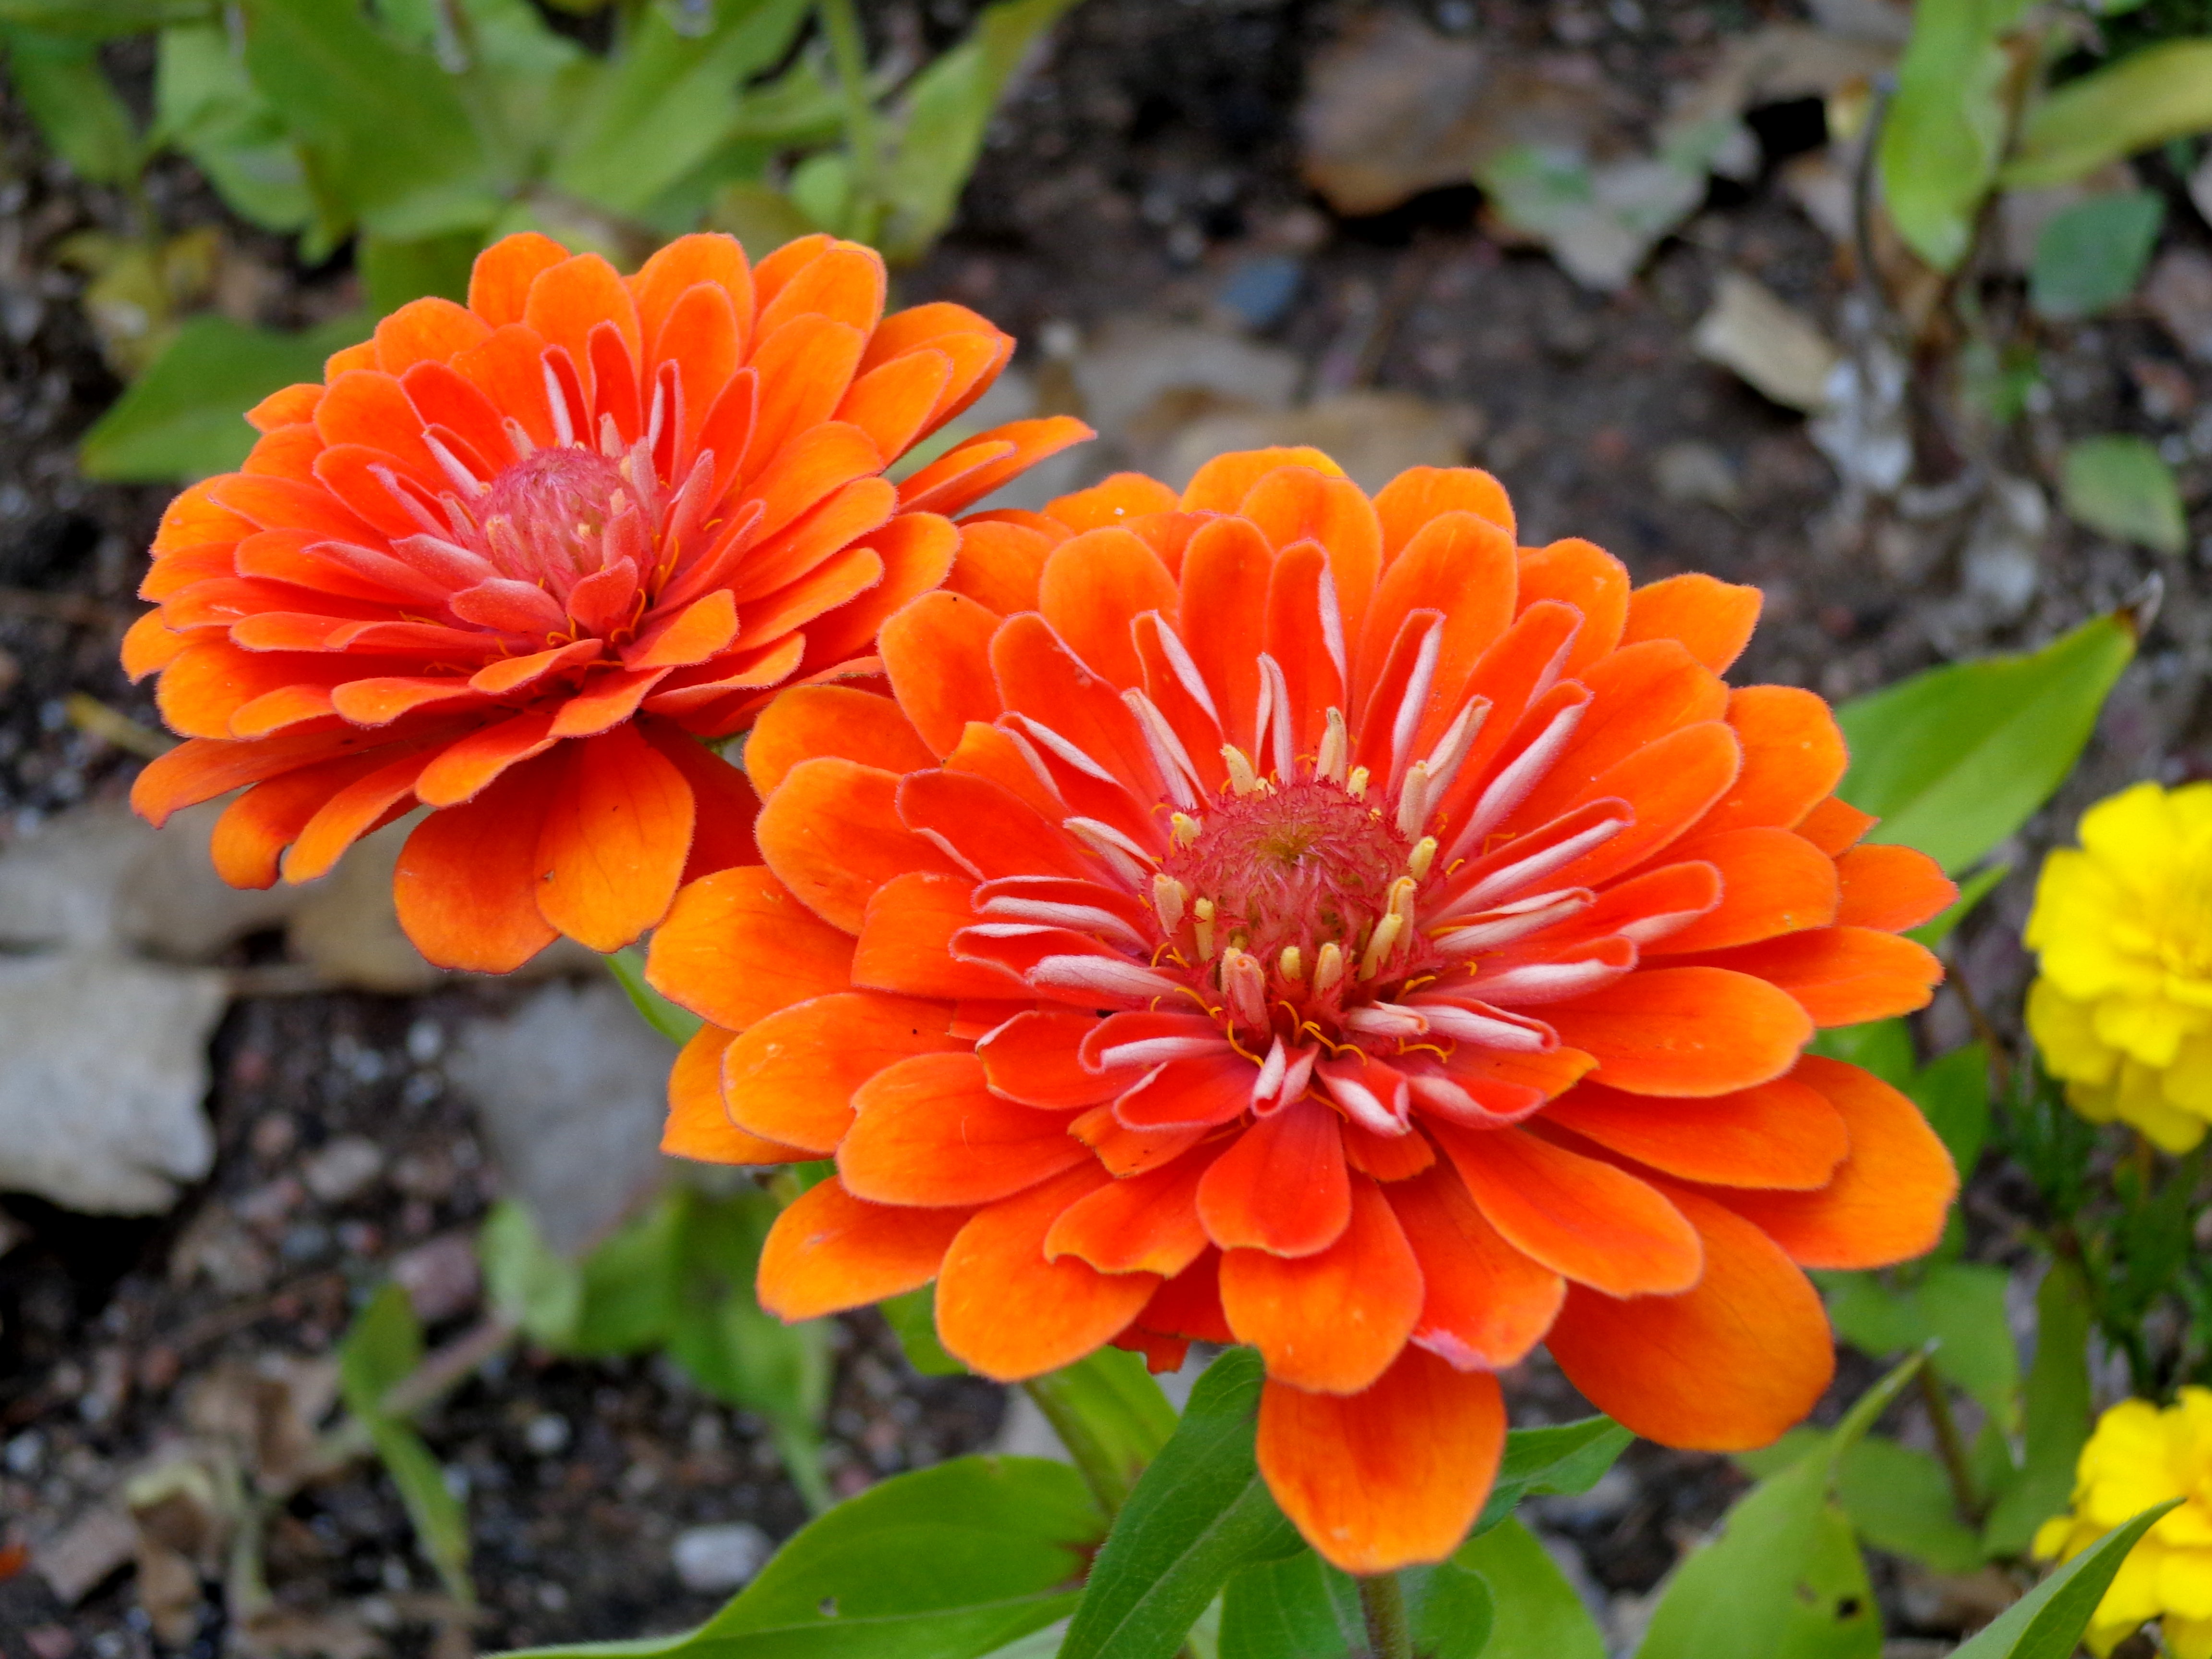 Zinnias are annual flowers that are easy to grow, bloom all summer, and bri...